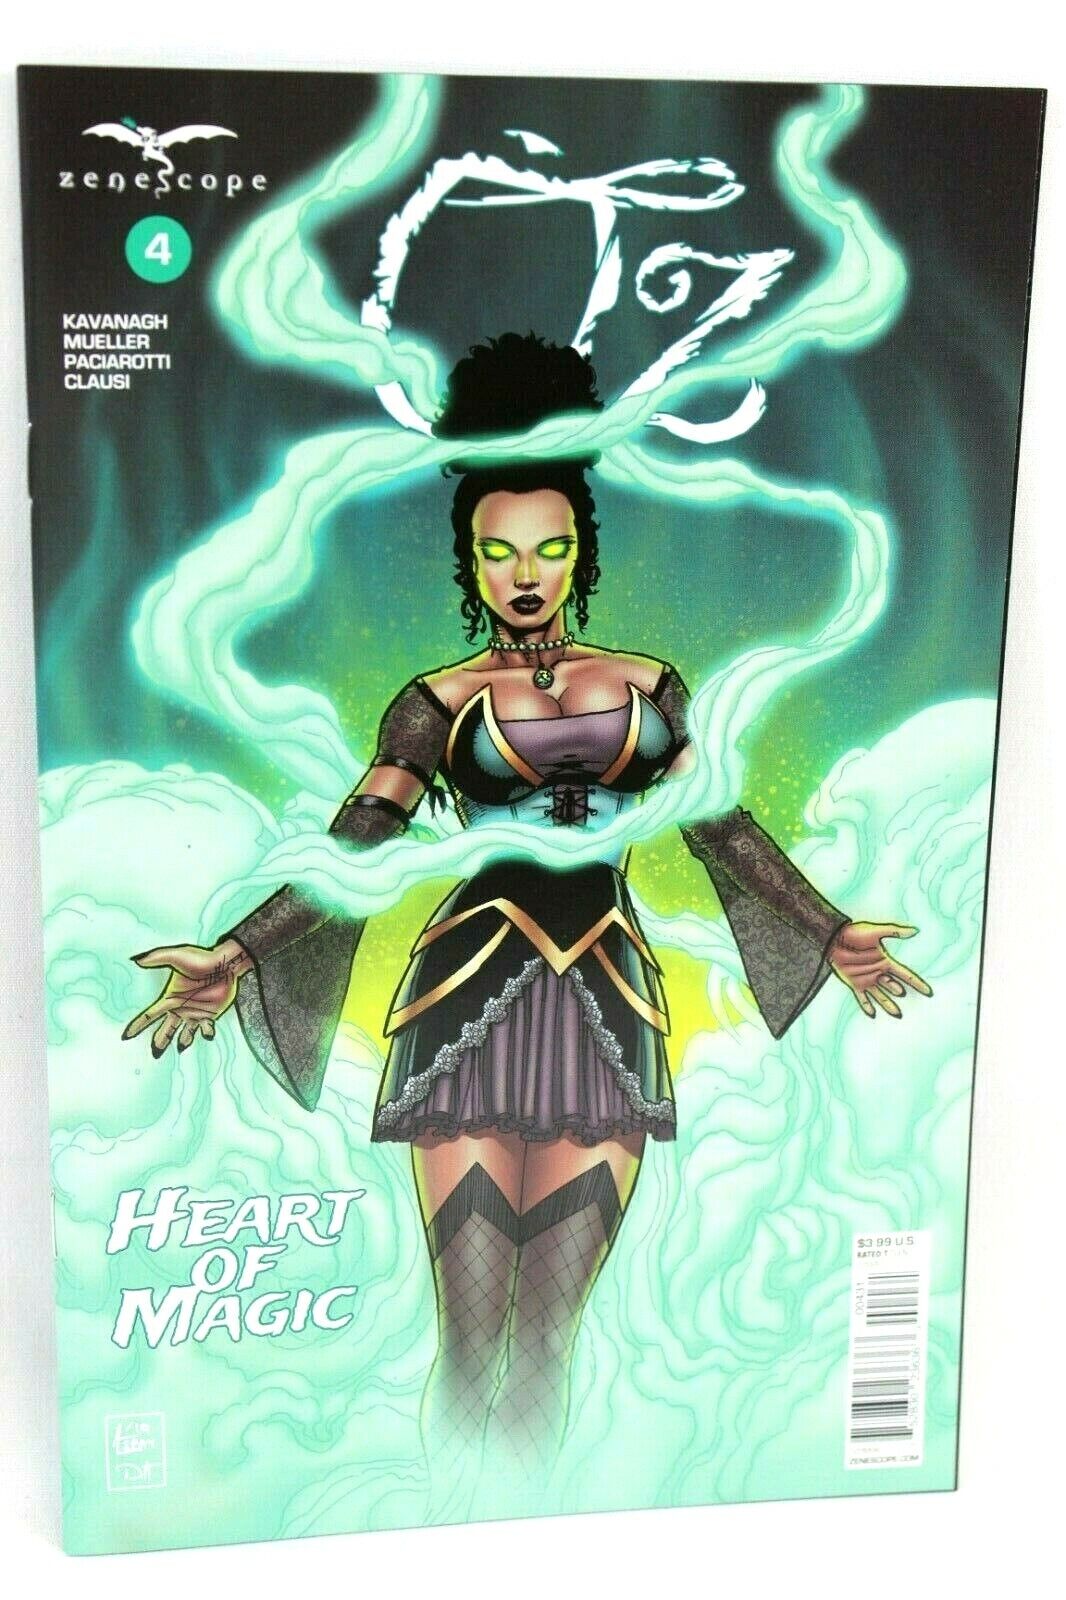 Oz Heart of Magic #4 Anthony Spay Cover C 2019 GFT Zenescope VF-